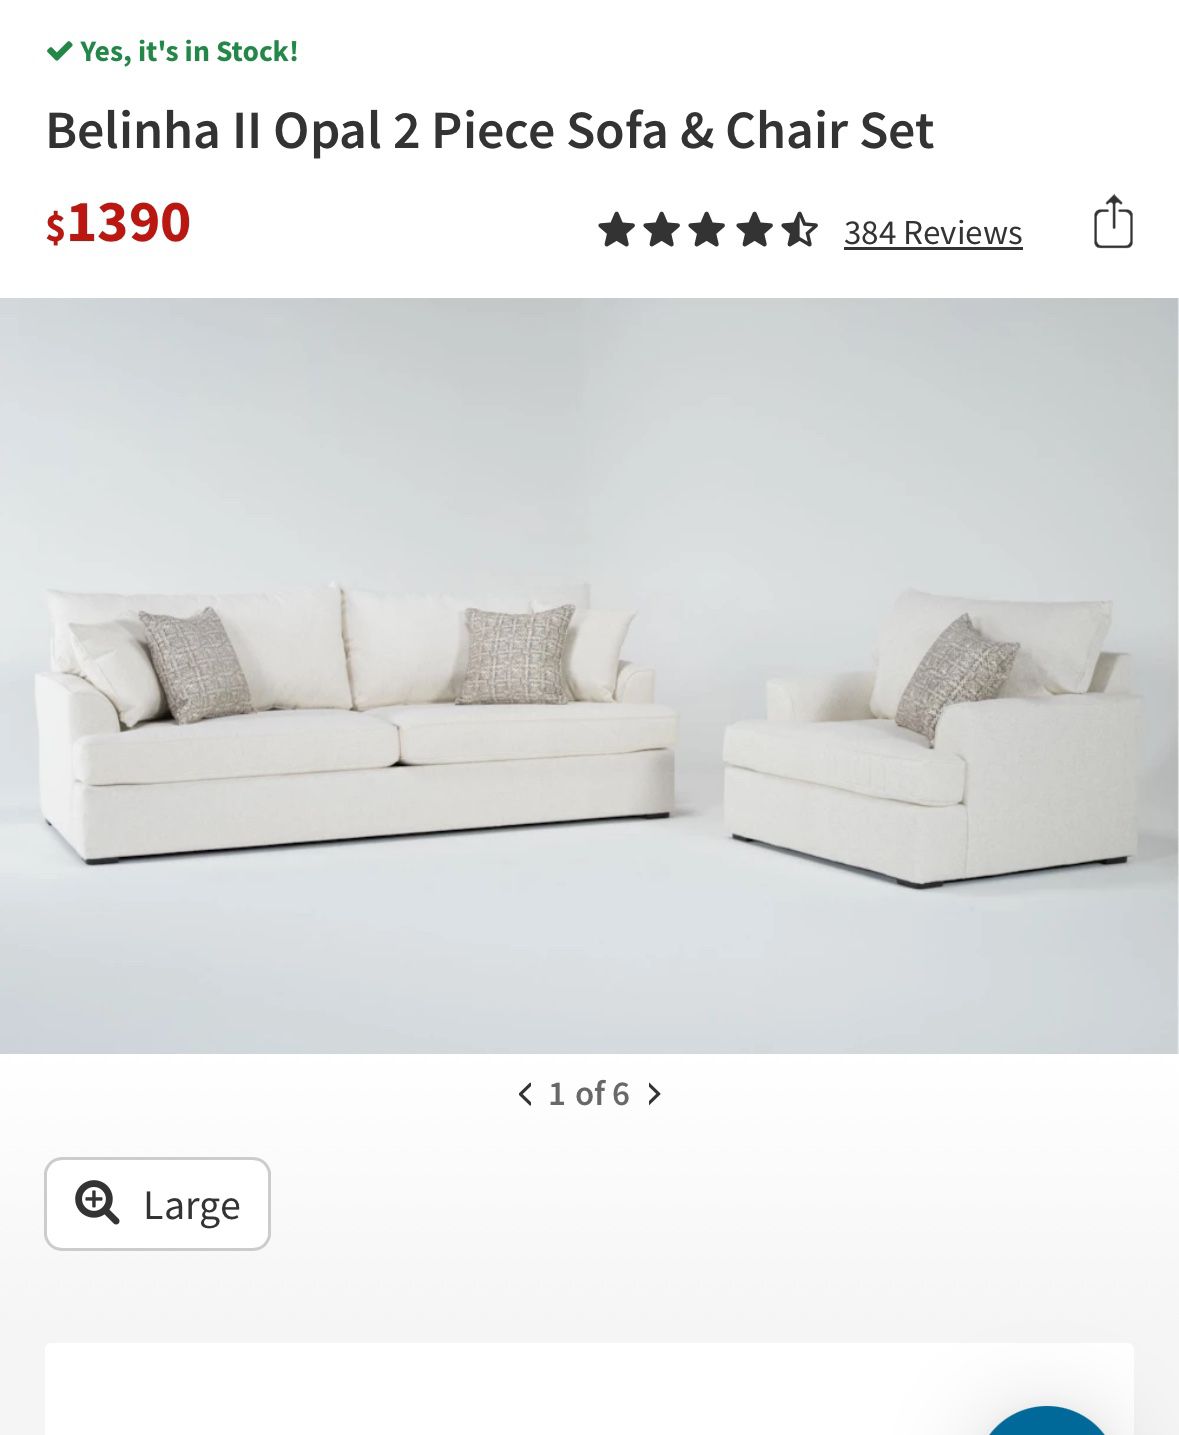 Couch Set For Sale 